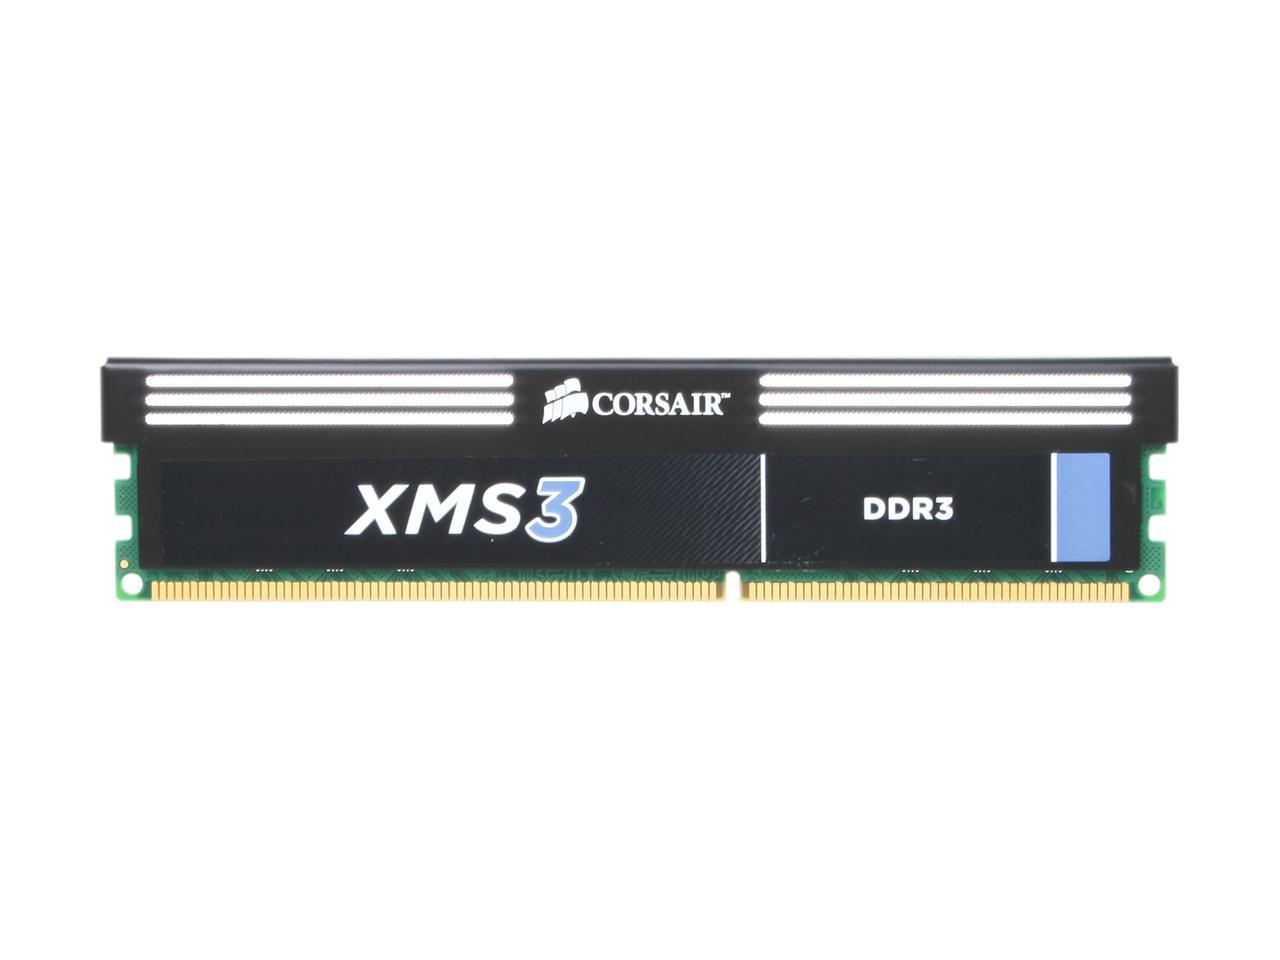 will the asus m4a88td v evo work with 1600 memory